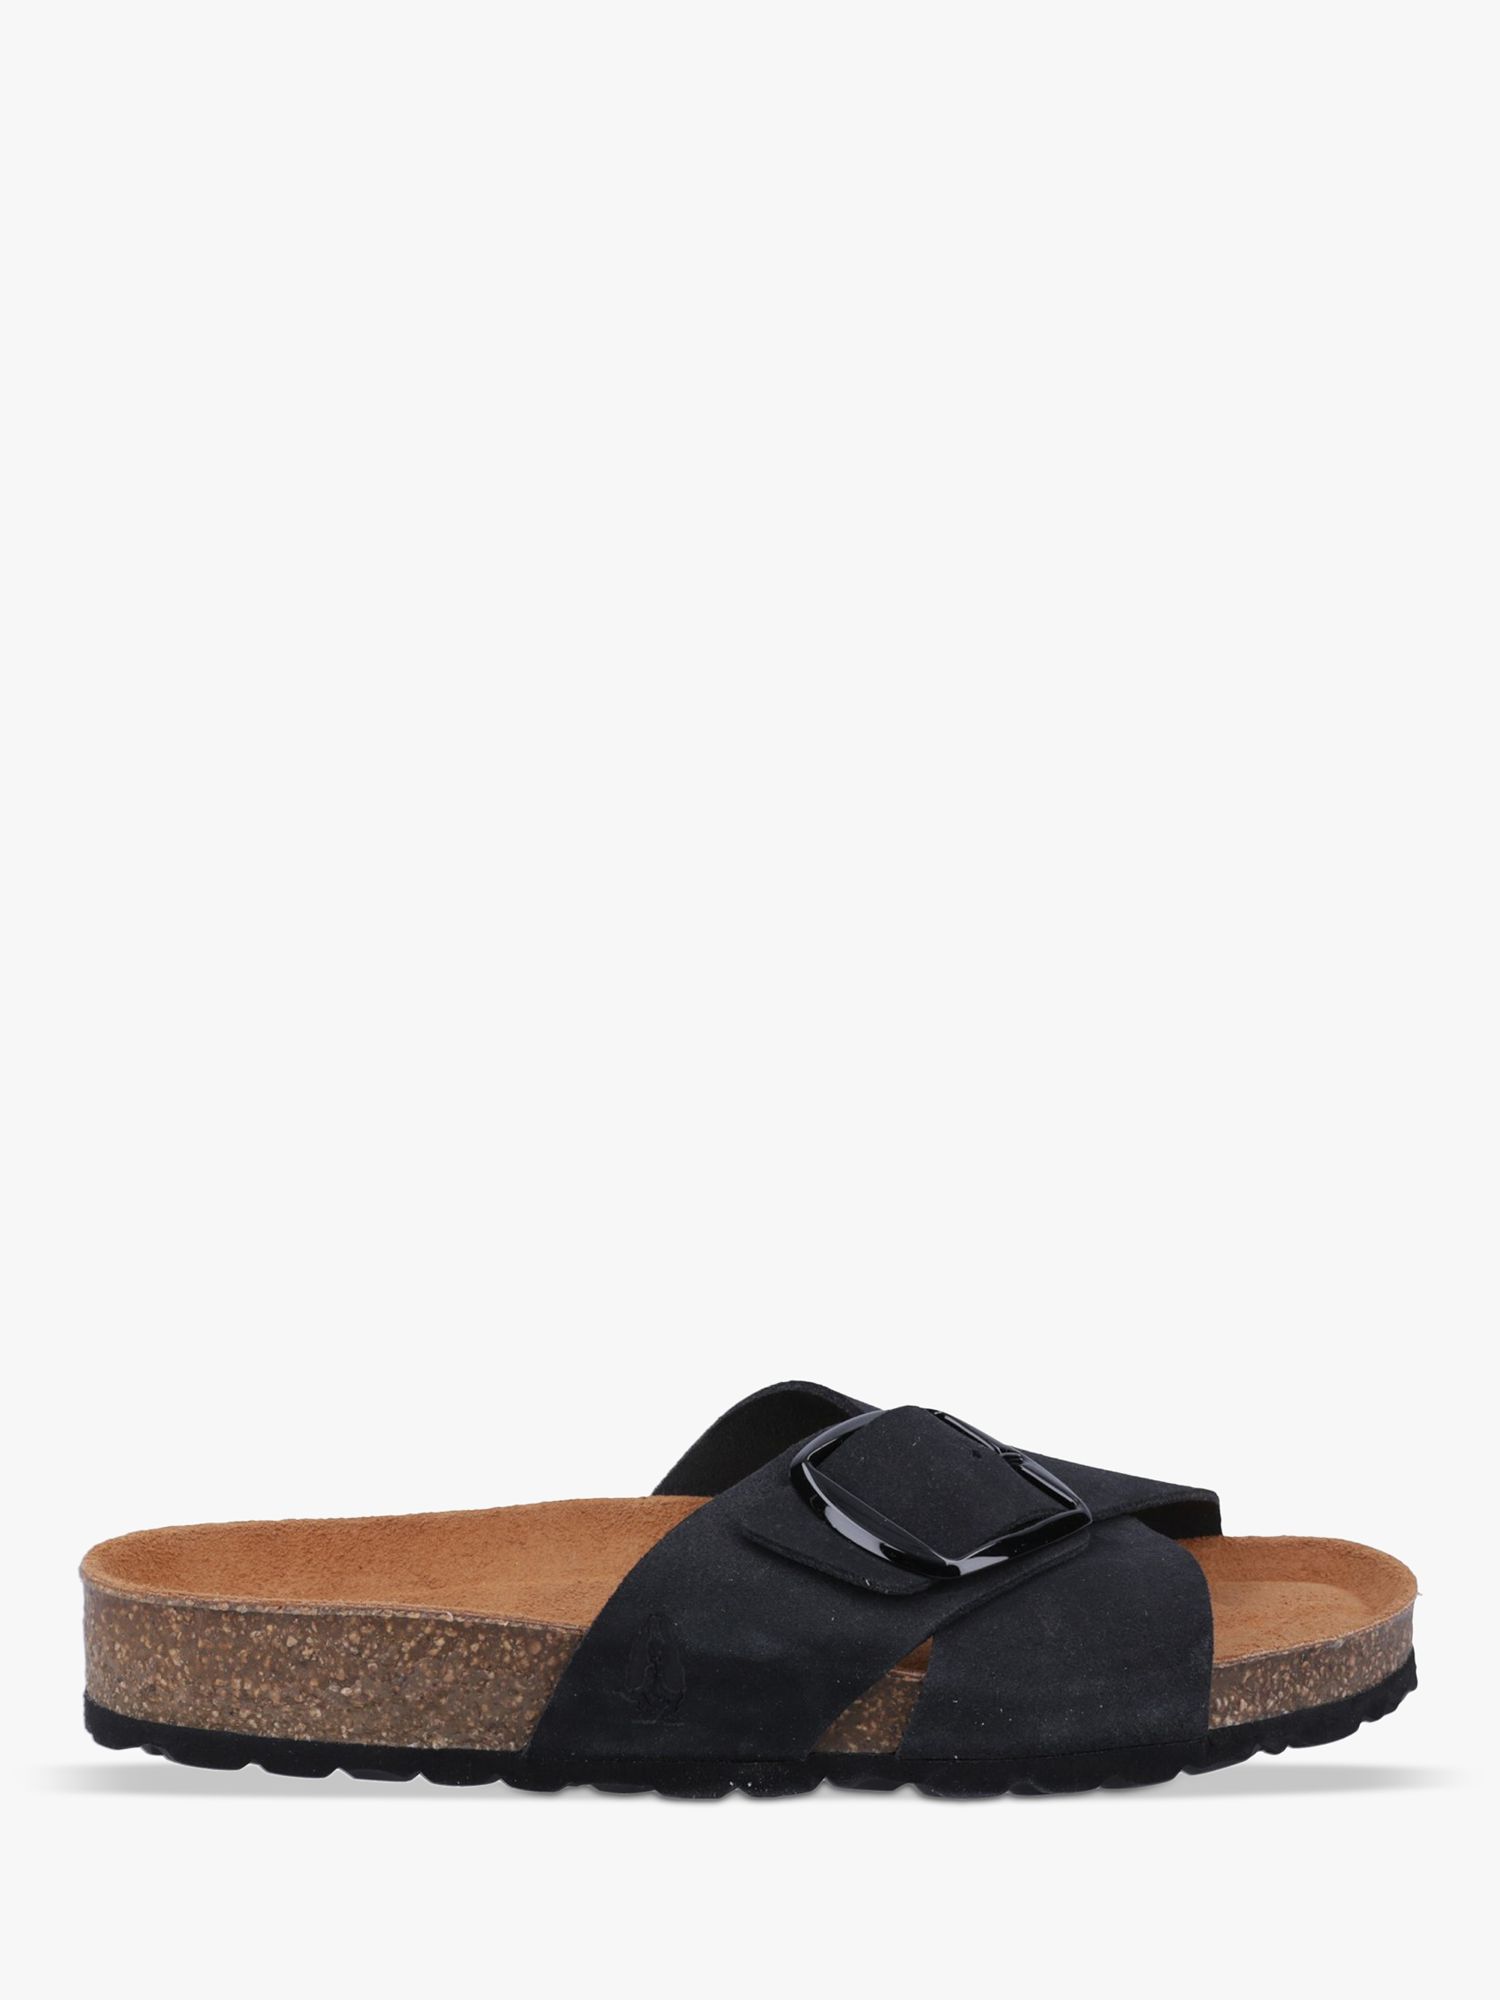 Hush Puppies Becky Suede Cross Strap Sliders, Black at John Lewis ...